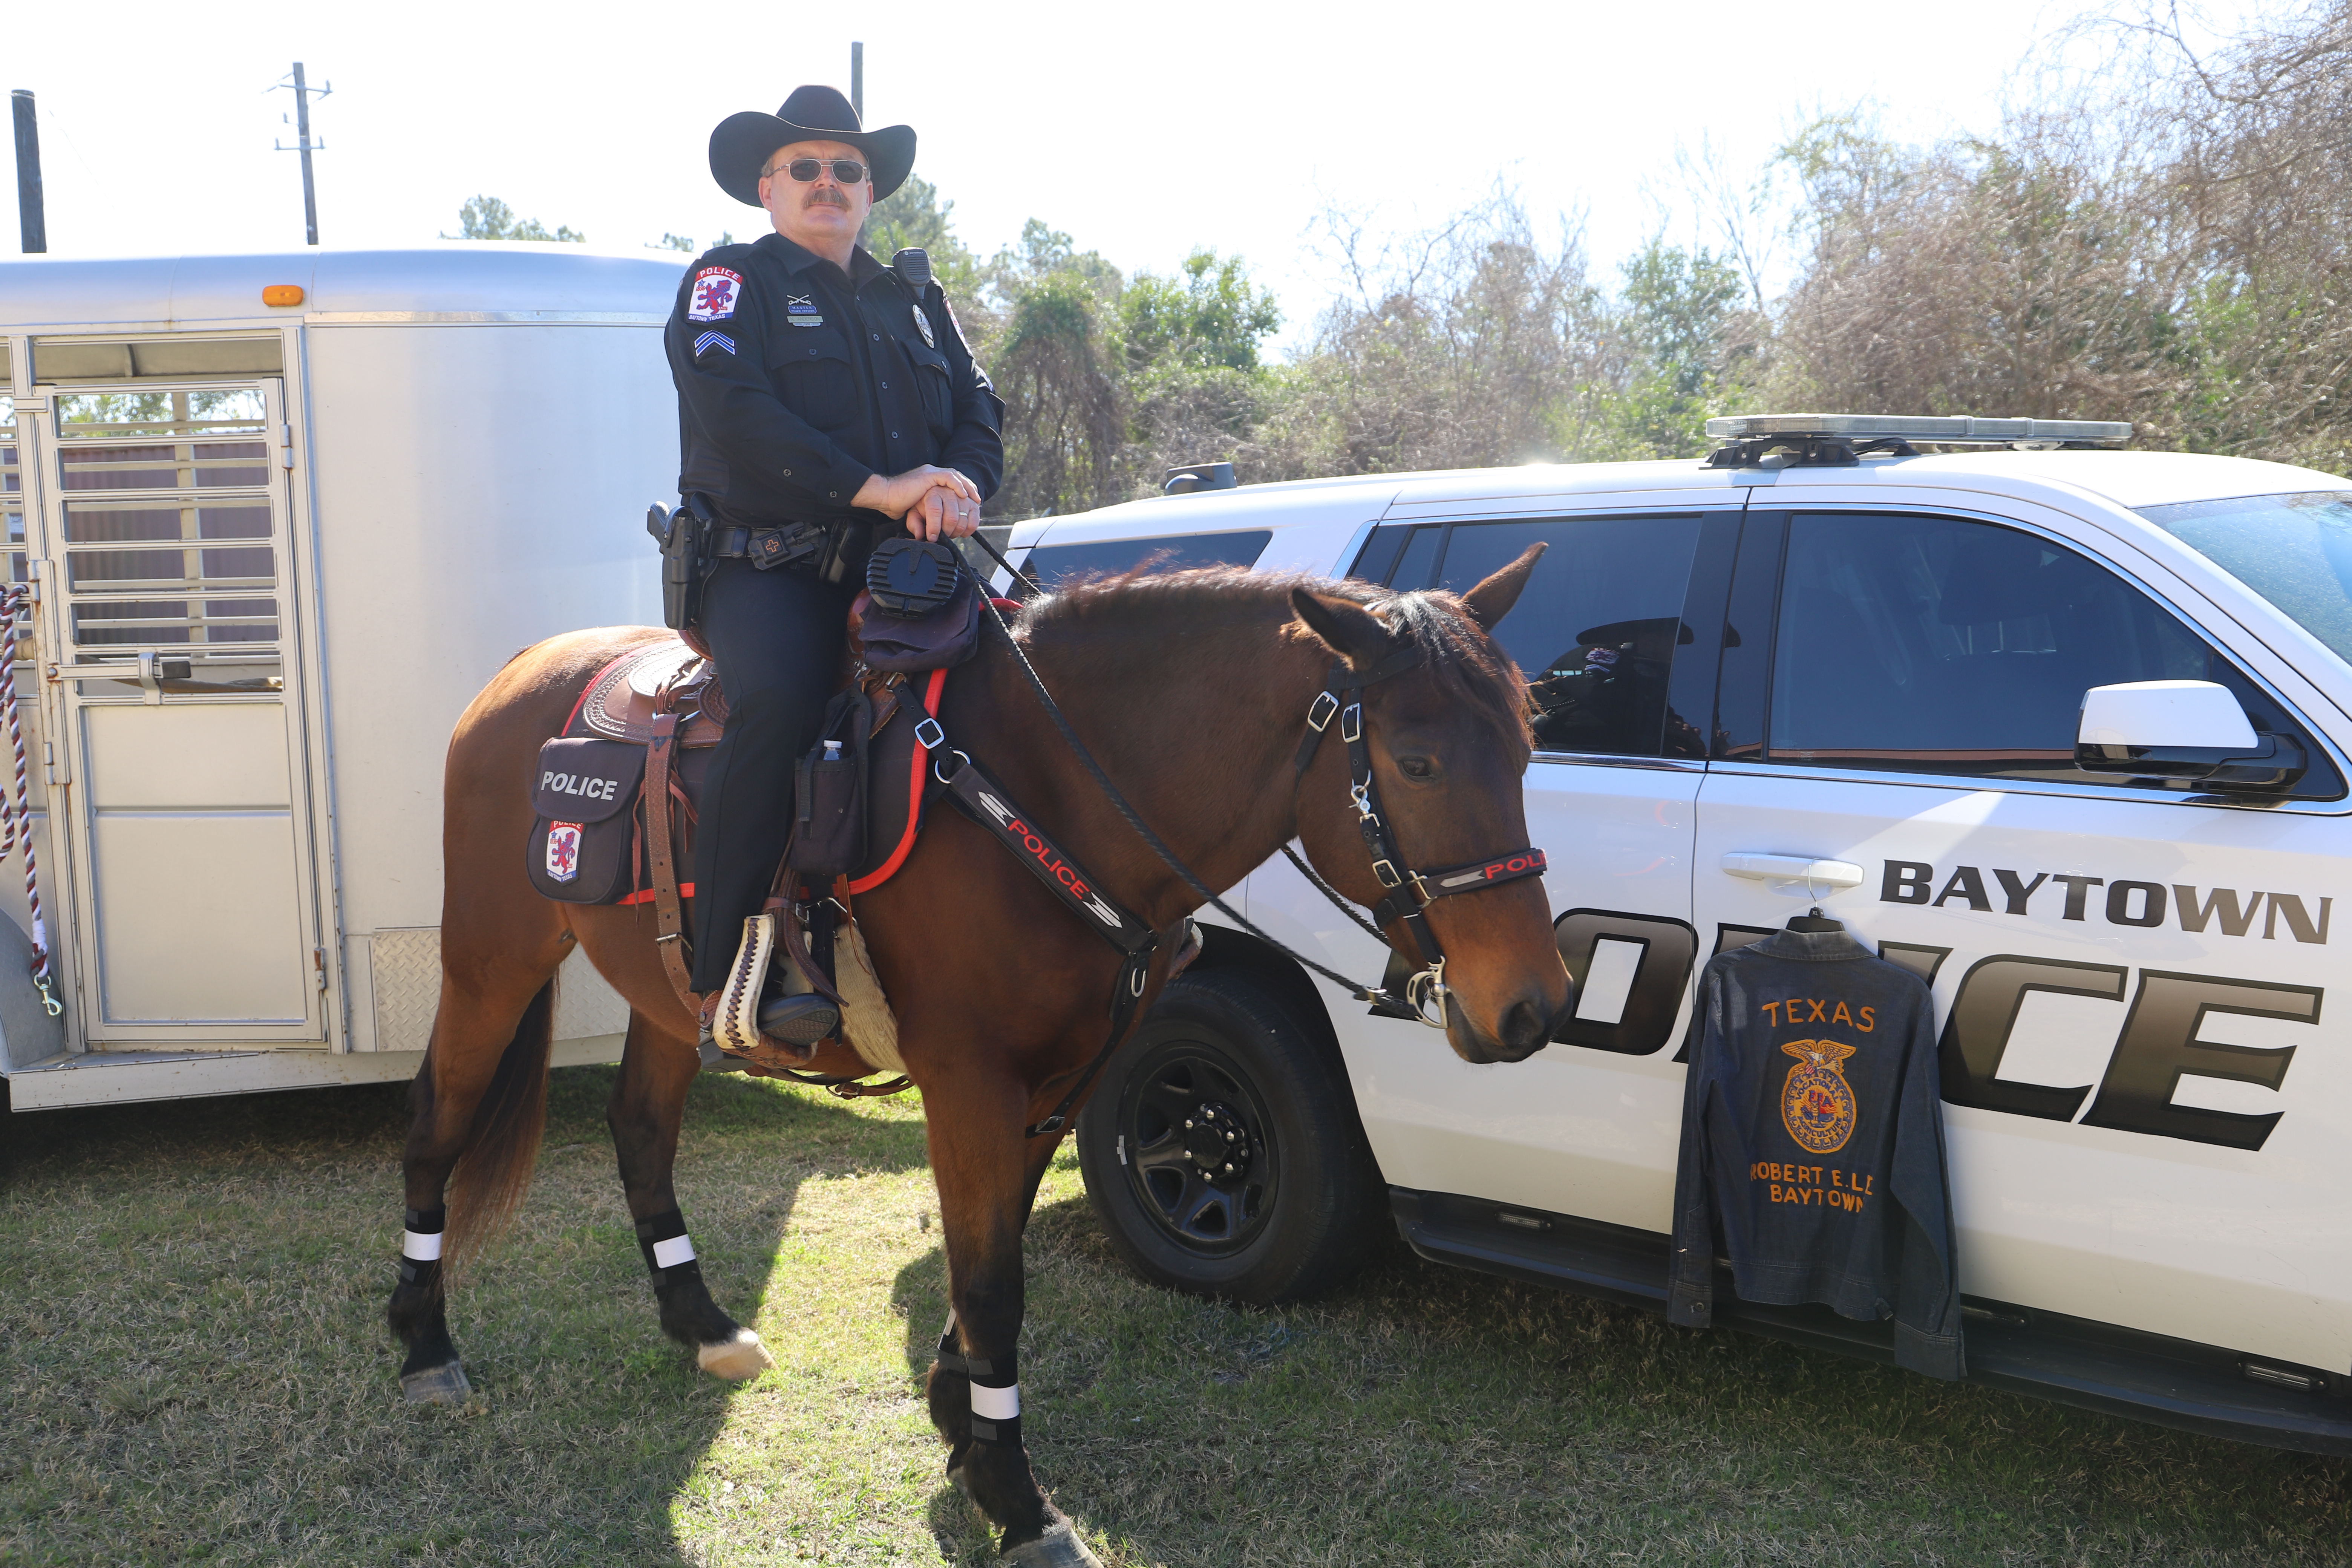 Baytown Police Officer Norman Anderson poses on his horse in front of his patrol vehicle